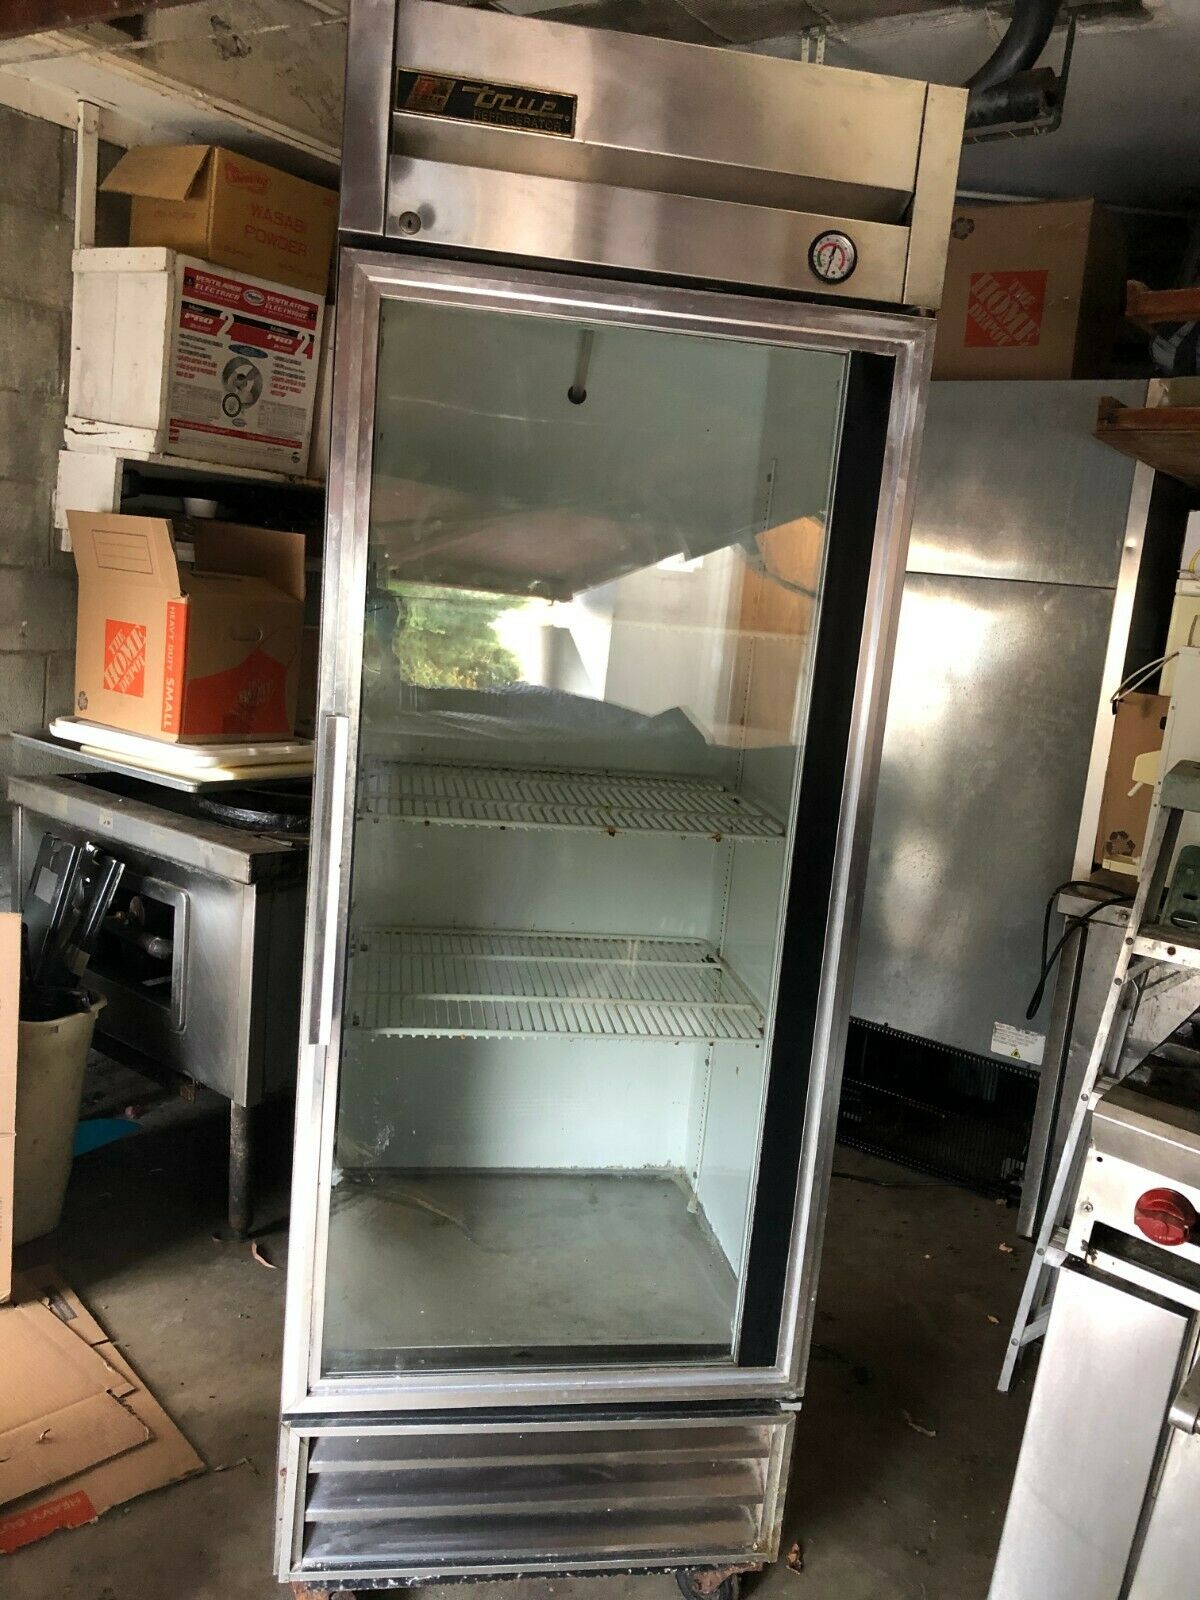 True Refrigerator- Commercial T-19g 19 Cu. Ft. Beverage Reach-in Good Condition